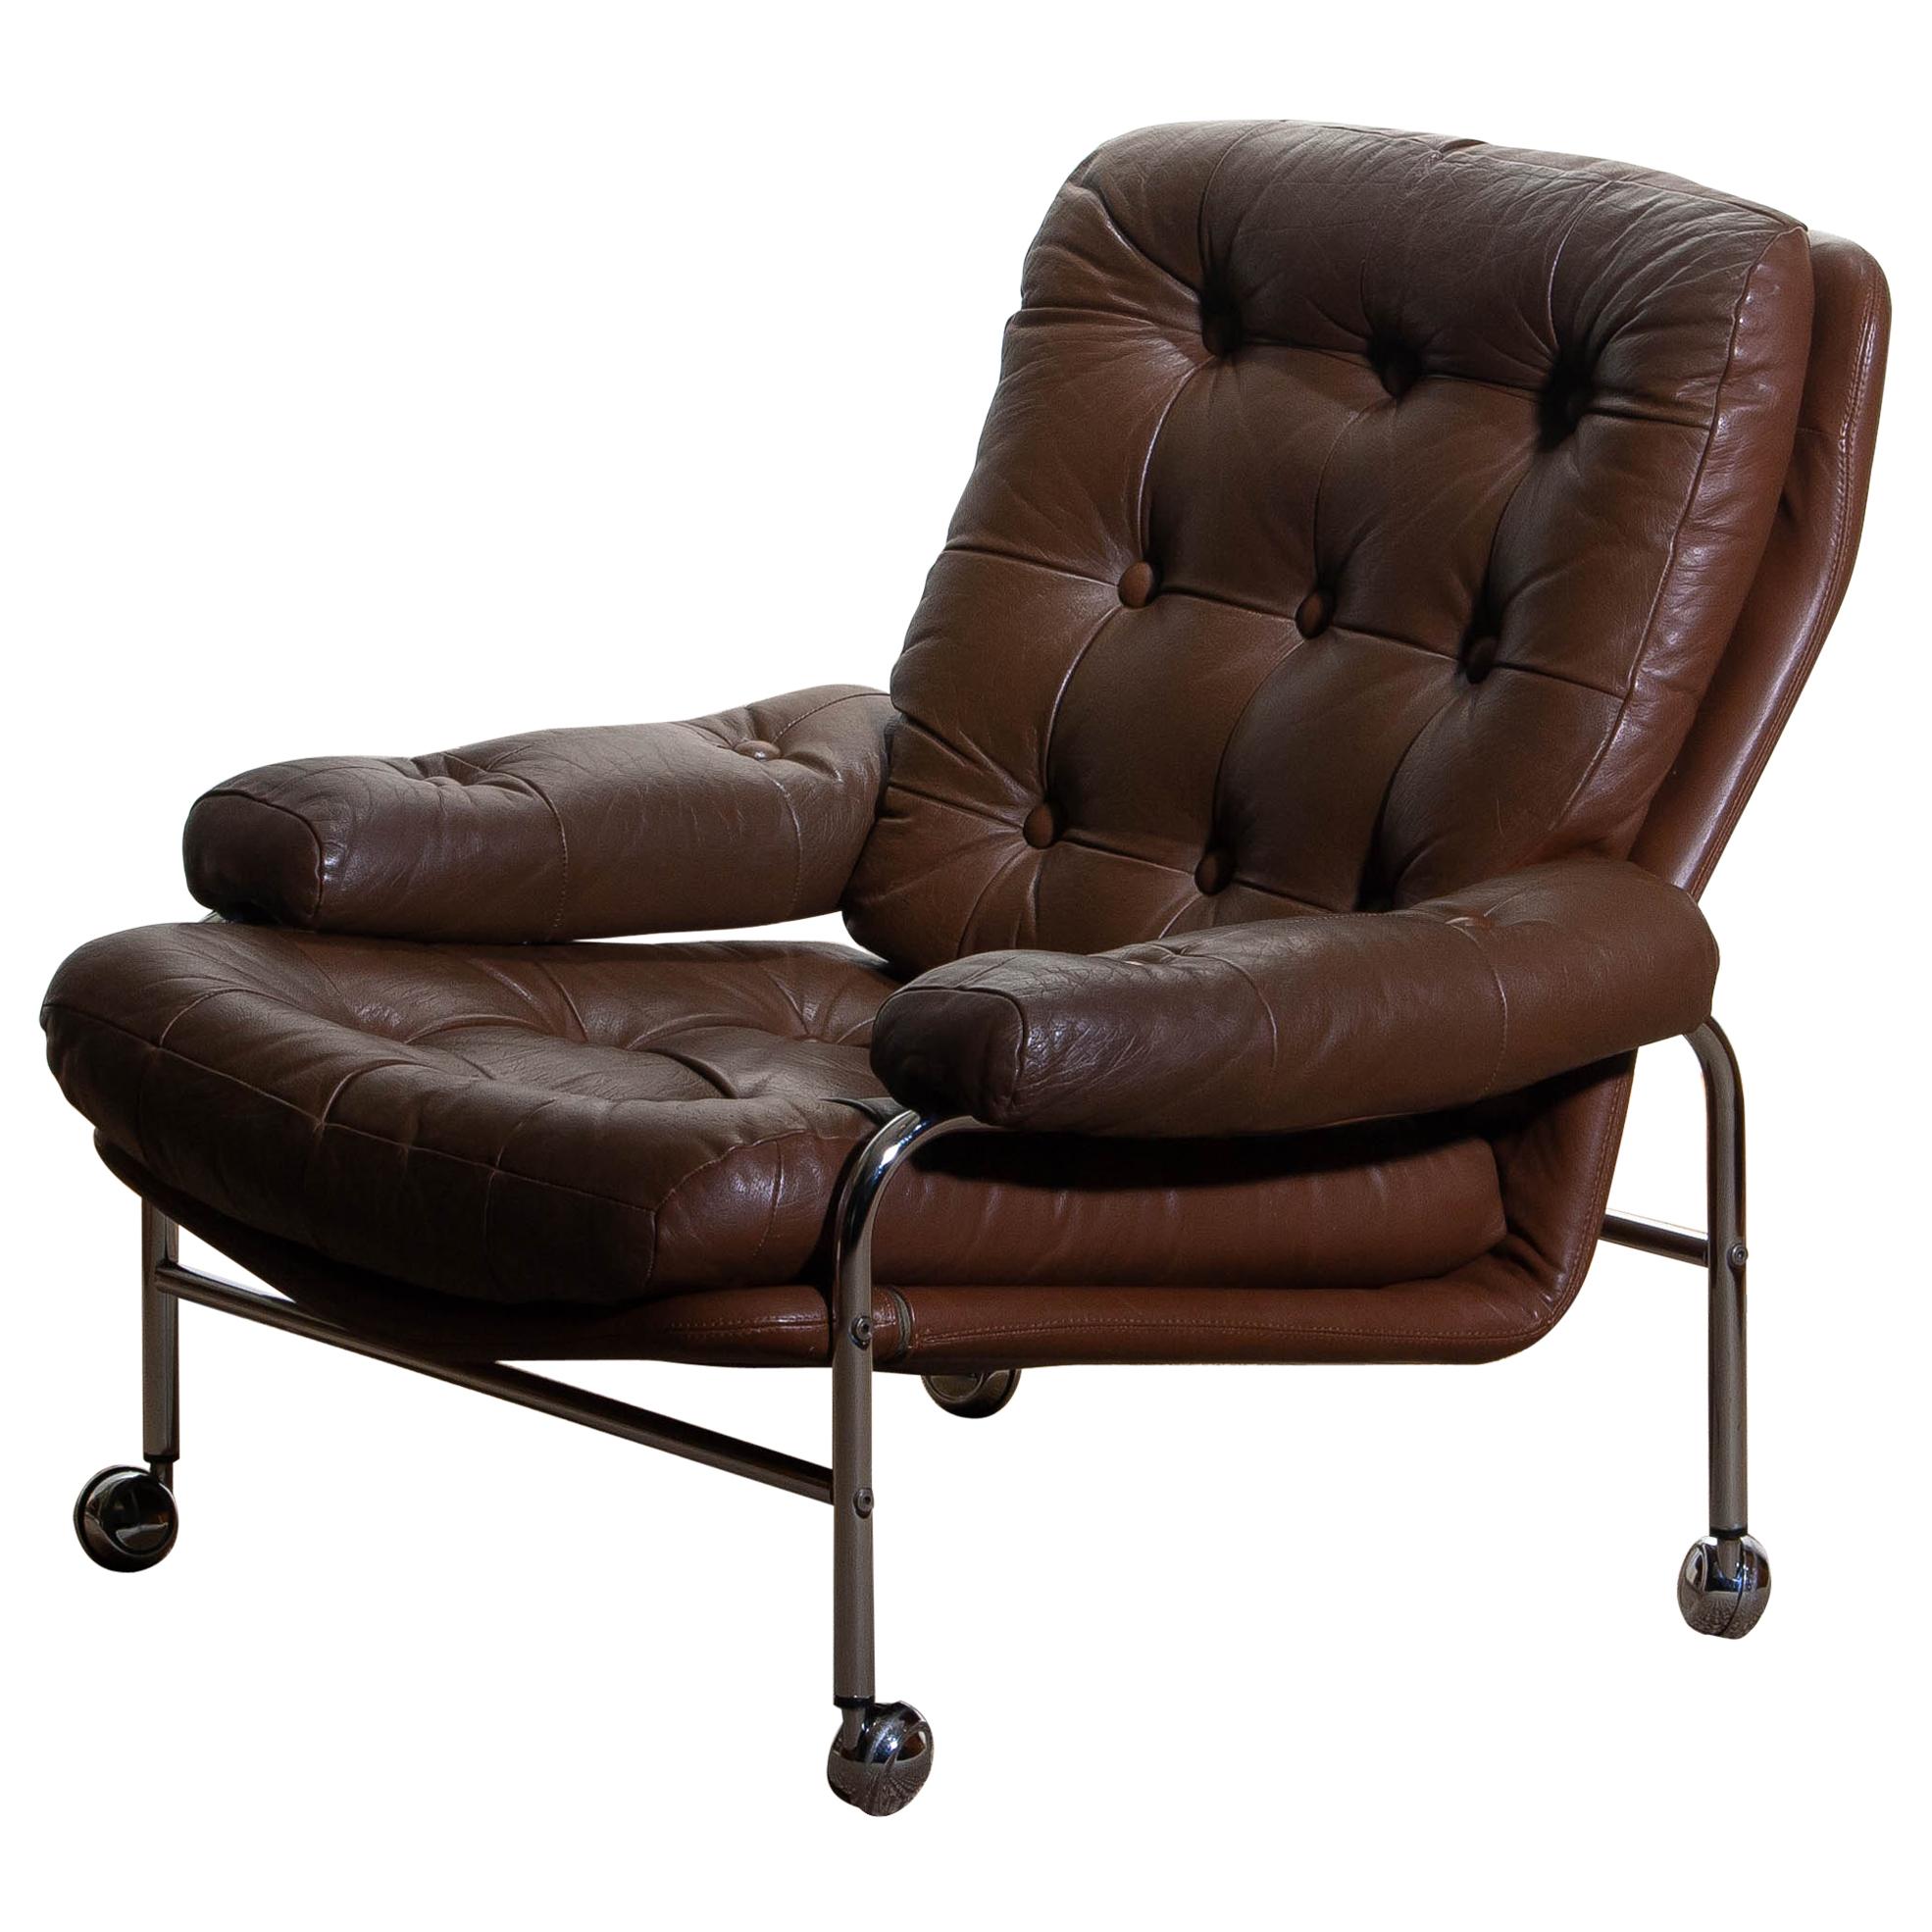 1970s, Chrome and Brown Leather Easy / Lounge Chair by Scapa Rydaholm, Sweden In Good Condition In Silvolde, Gelderland